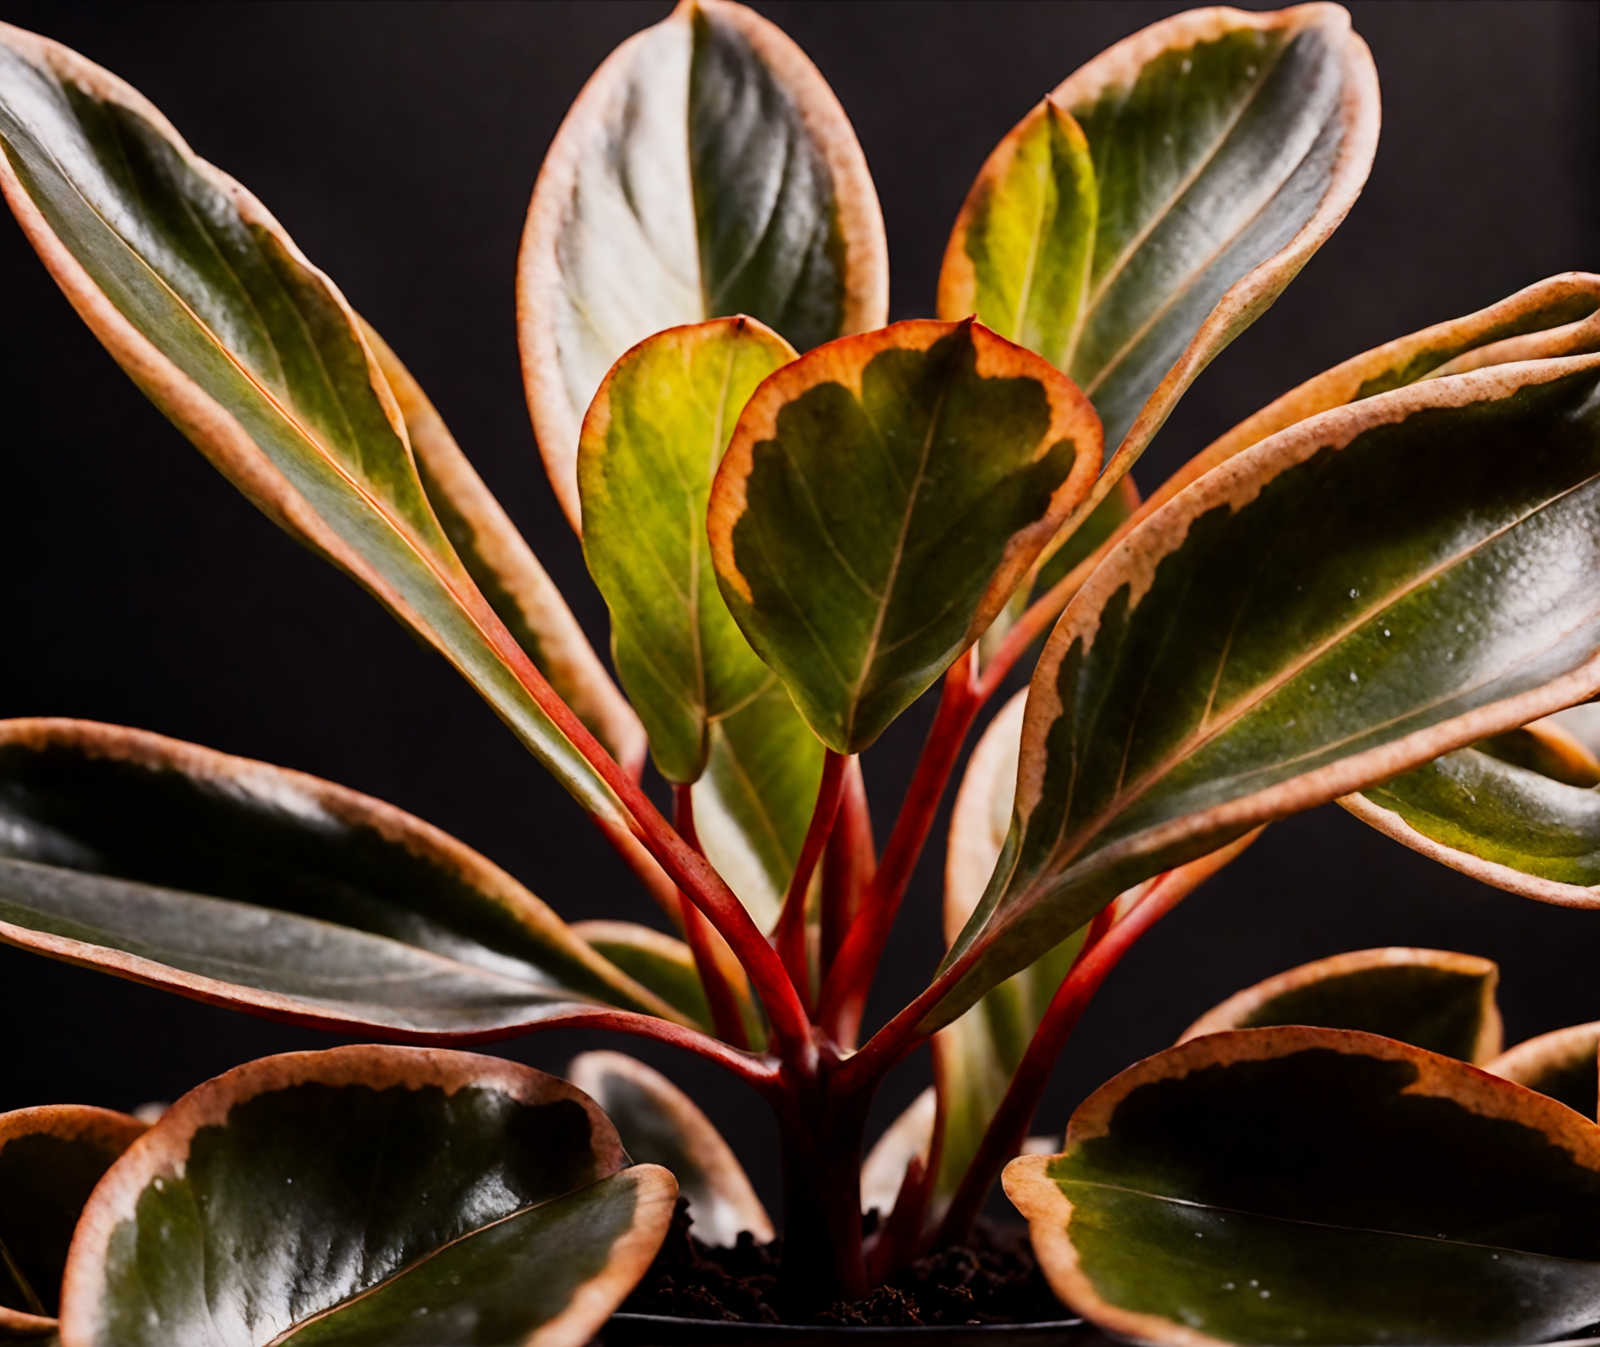 Peperomia clusiifolia with vibrant red leaves in a planter, clear indoor lighting, against a dark background.